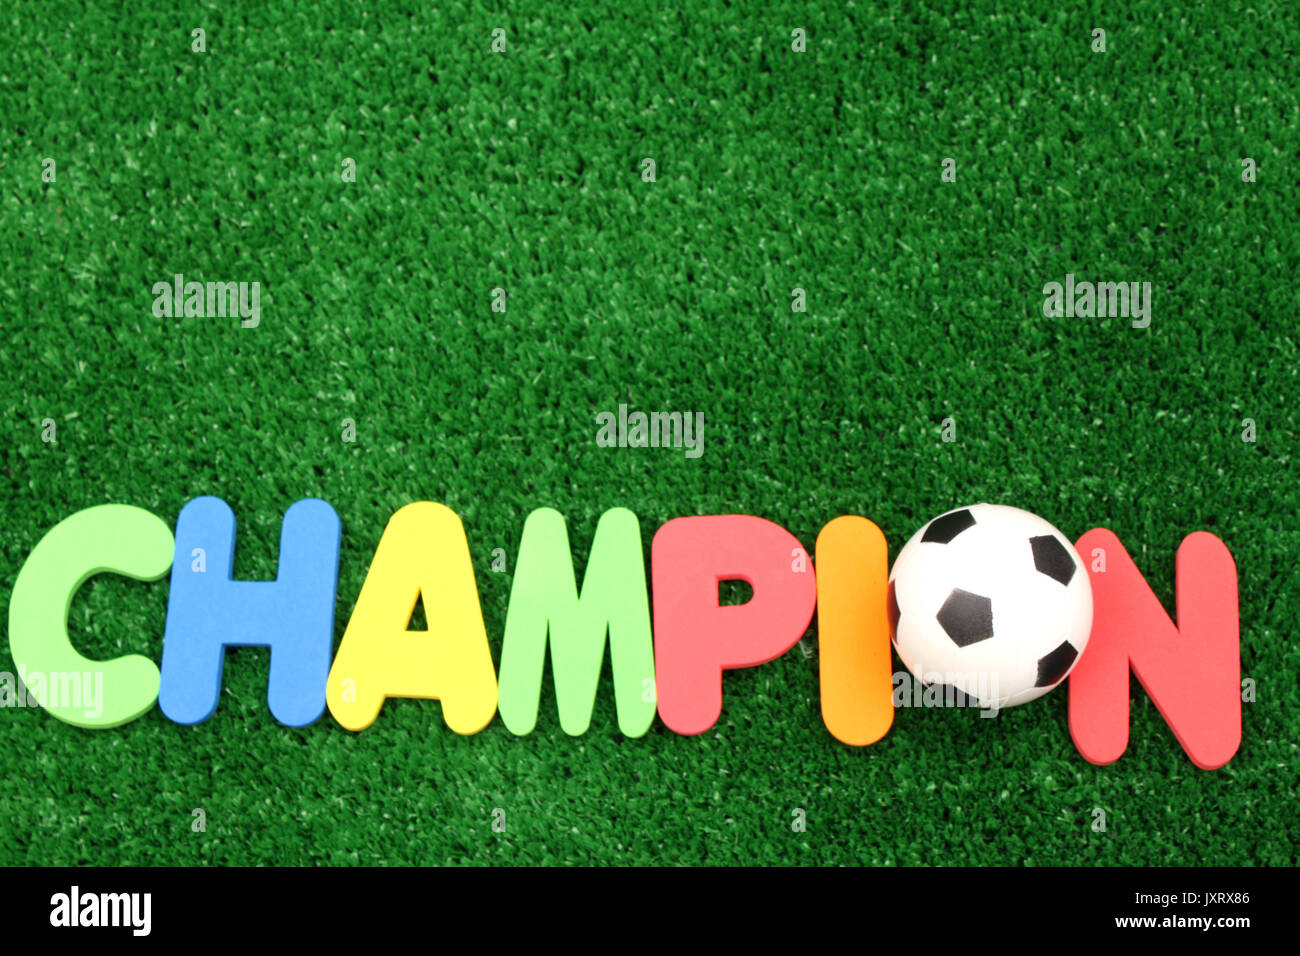 Champion ball on atificial turf - word plastic colours Stock Photo